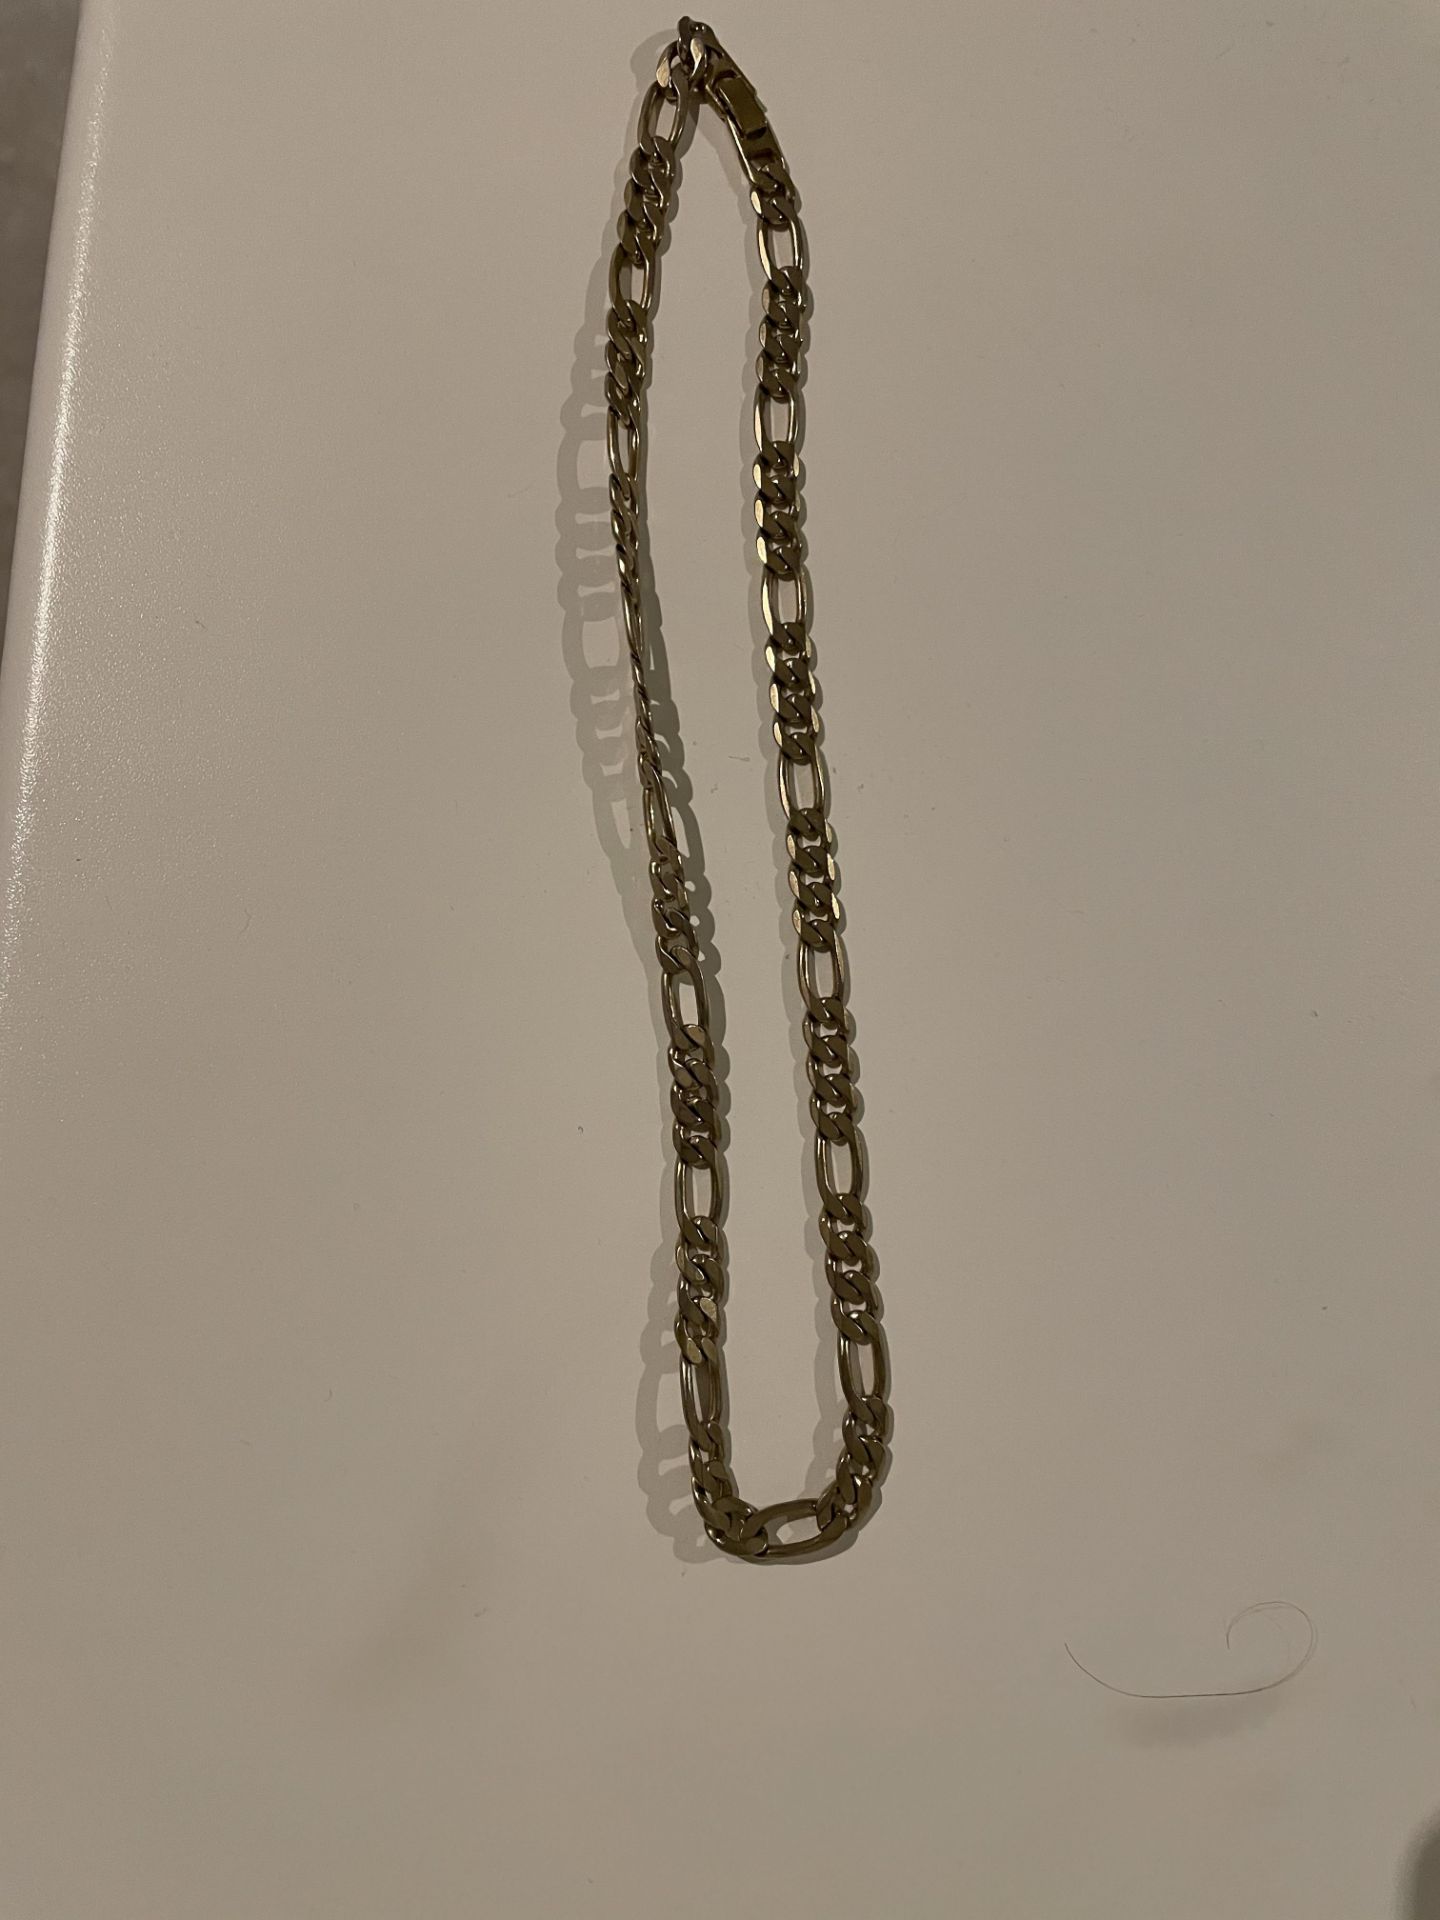 Chain and ring - Image 2 of 2